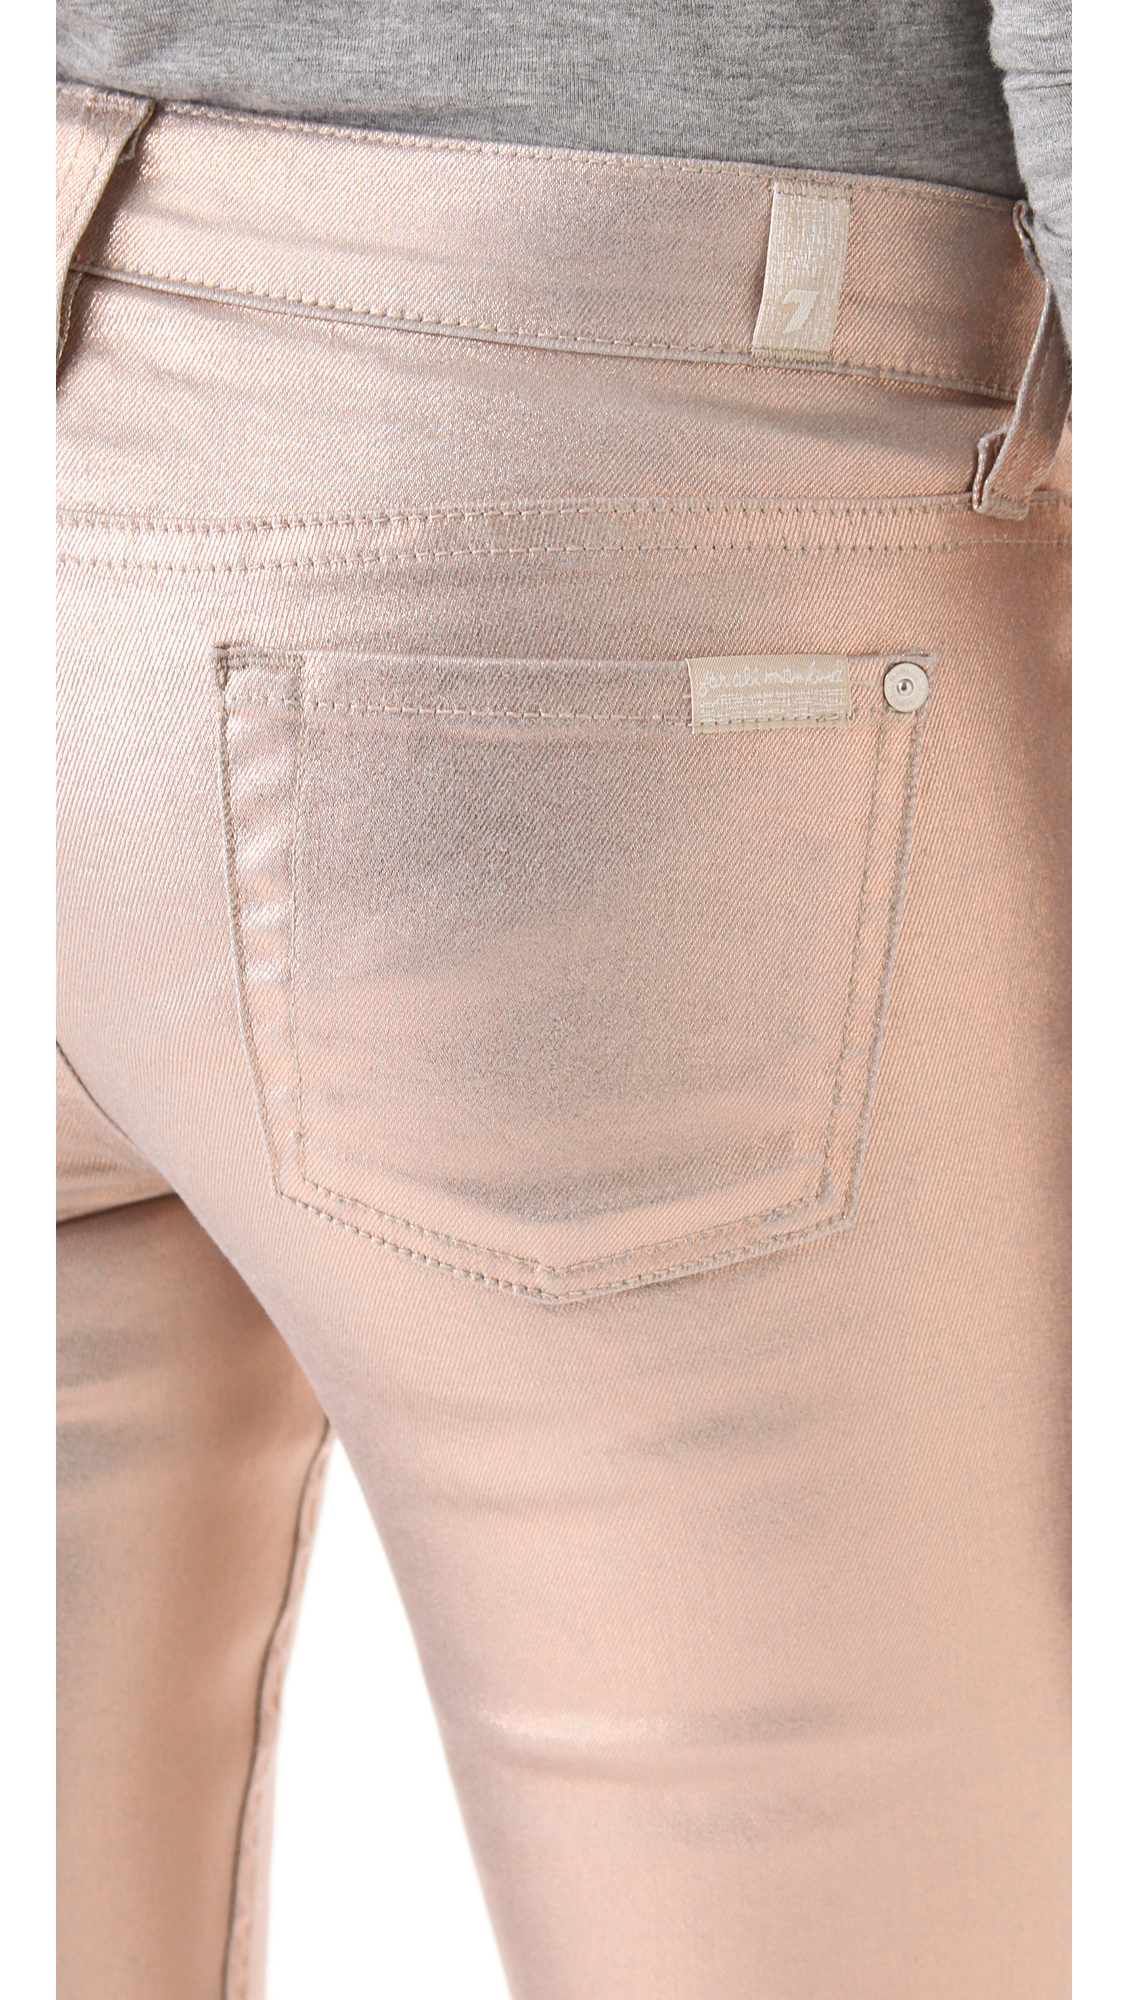 7 For All Mankind Coated Skinny Jeans in Liquid Metallic in Pink | Lyst